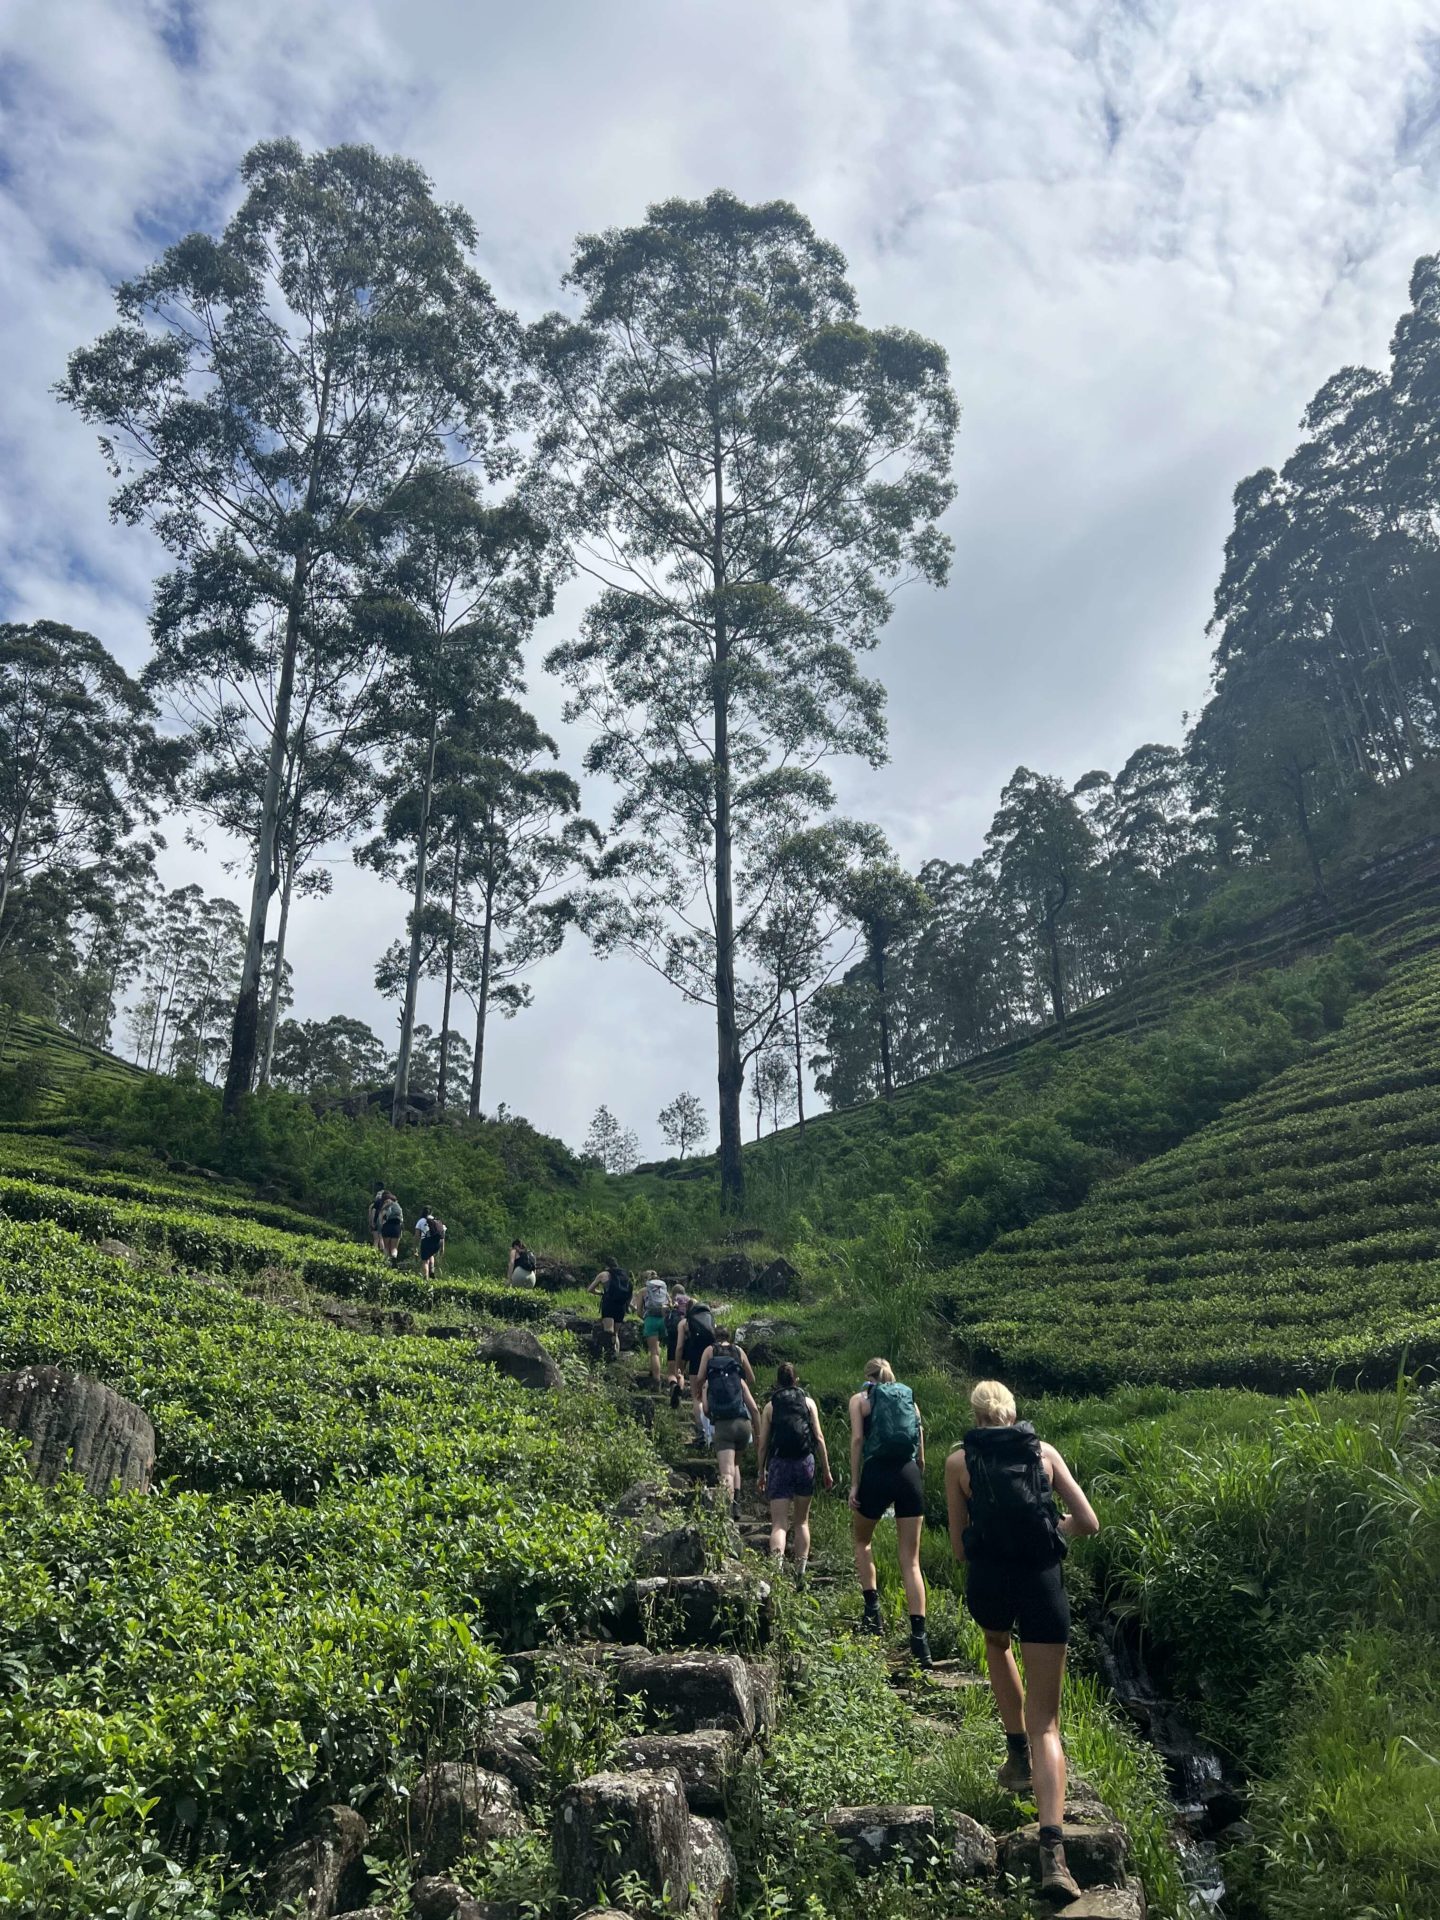 A trail of women hiking up a hill in Sri Lanka surrounded by lush green forest